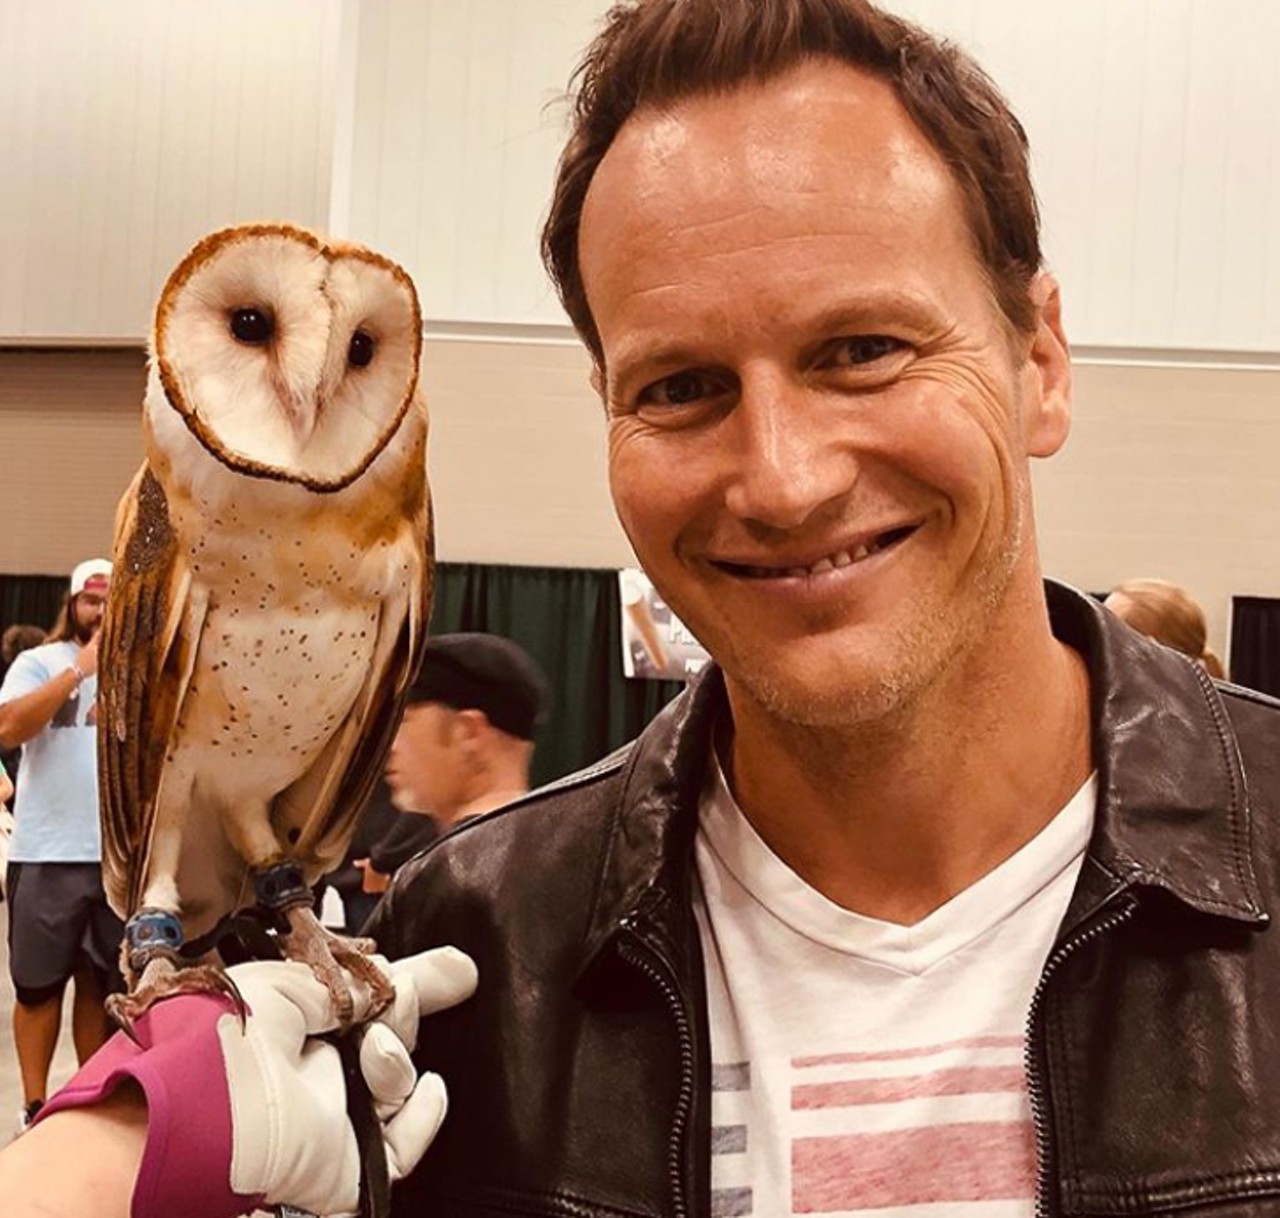 Patrick Wilson - Shorecrest Prep (1991)
Wilson is an actor and singer. He&#146;s been in &#147;Phantom of the Opera,&#148; &#147;Insidious,&#148; and &#147;Watchmen.&#148; He also spends his time on Broadway.
Photo via @TheReelPatrickWilson/Instagram